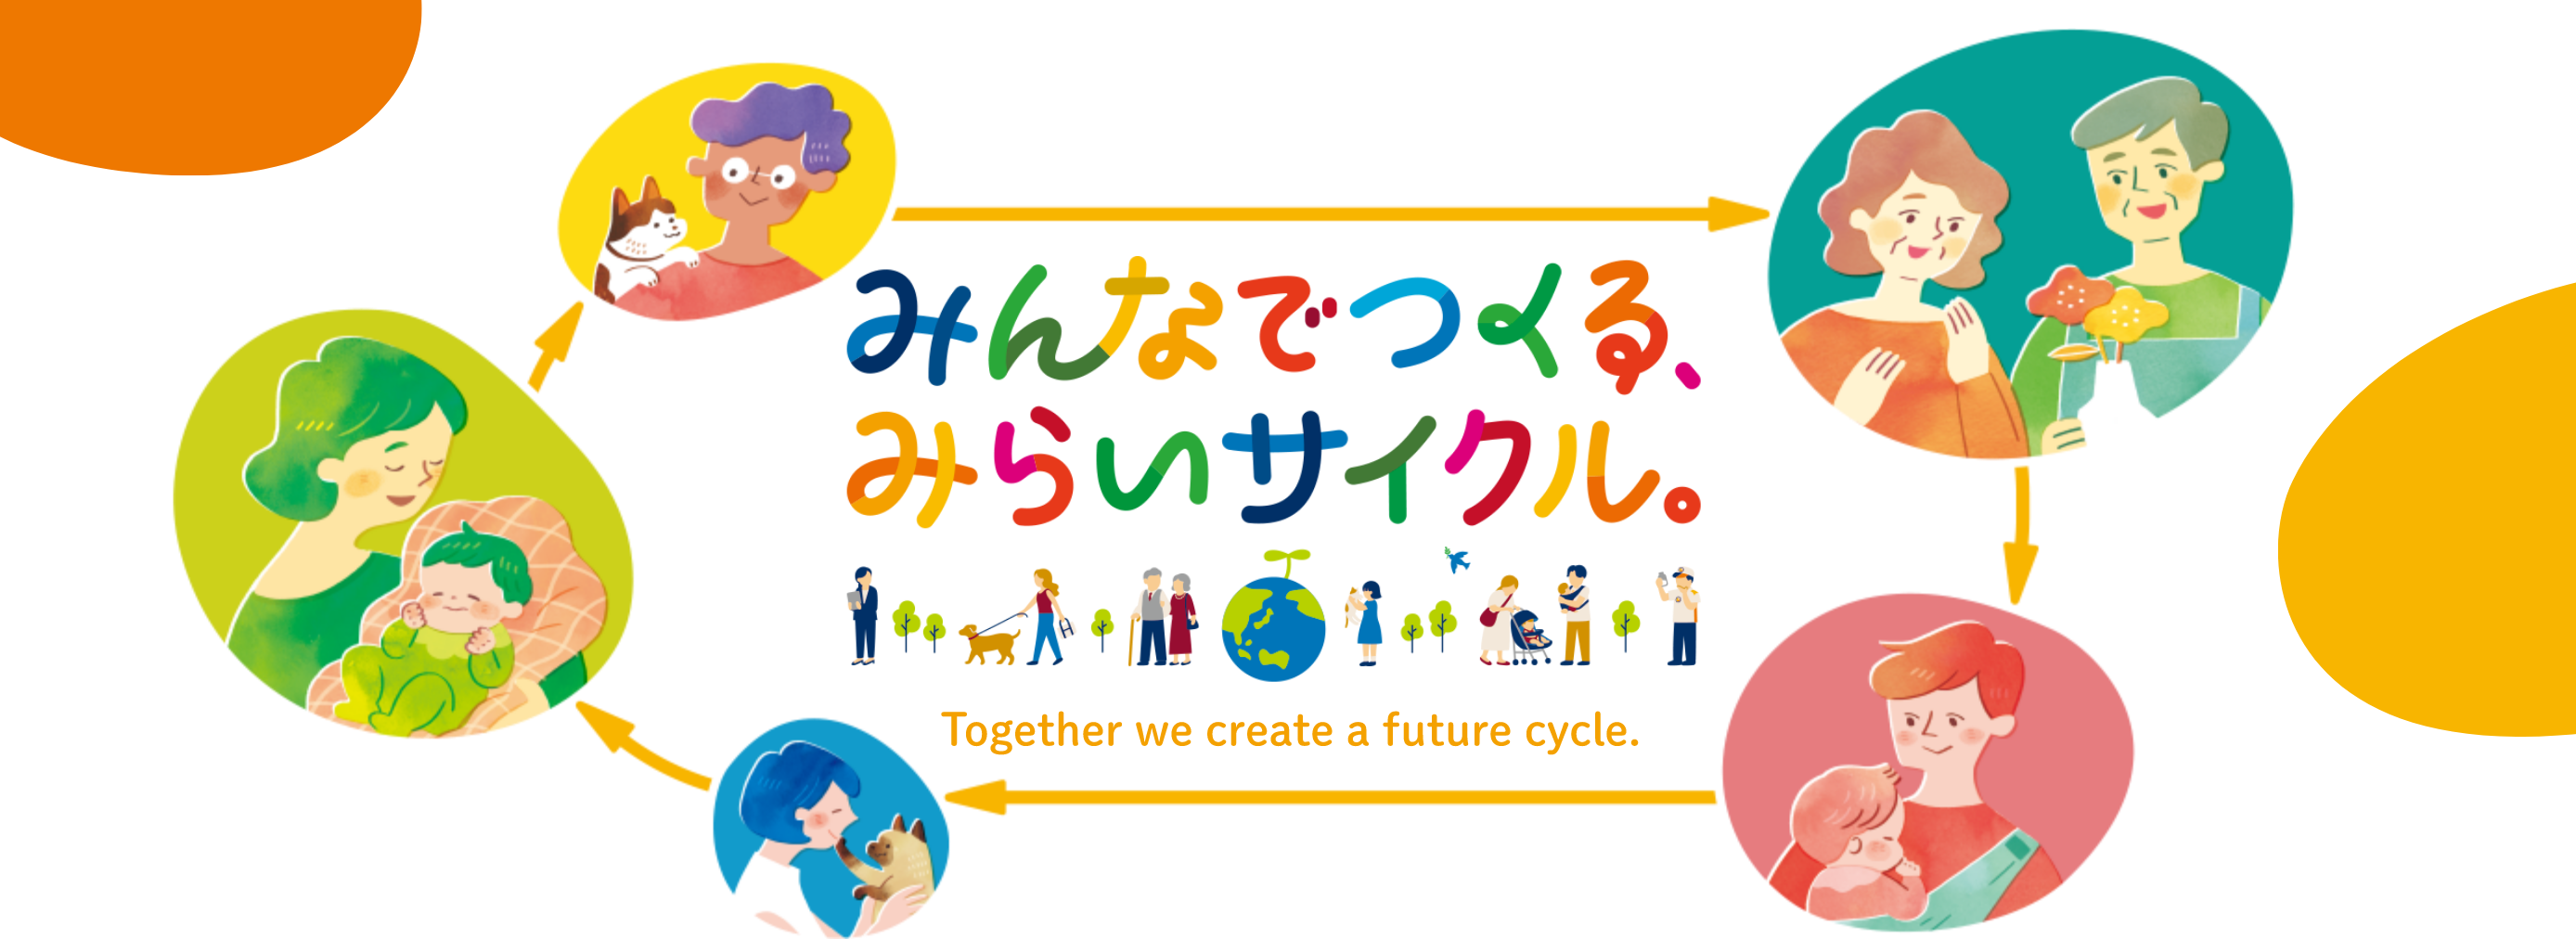 Together we create a future cycle